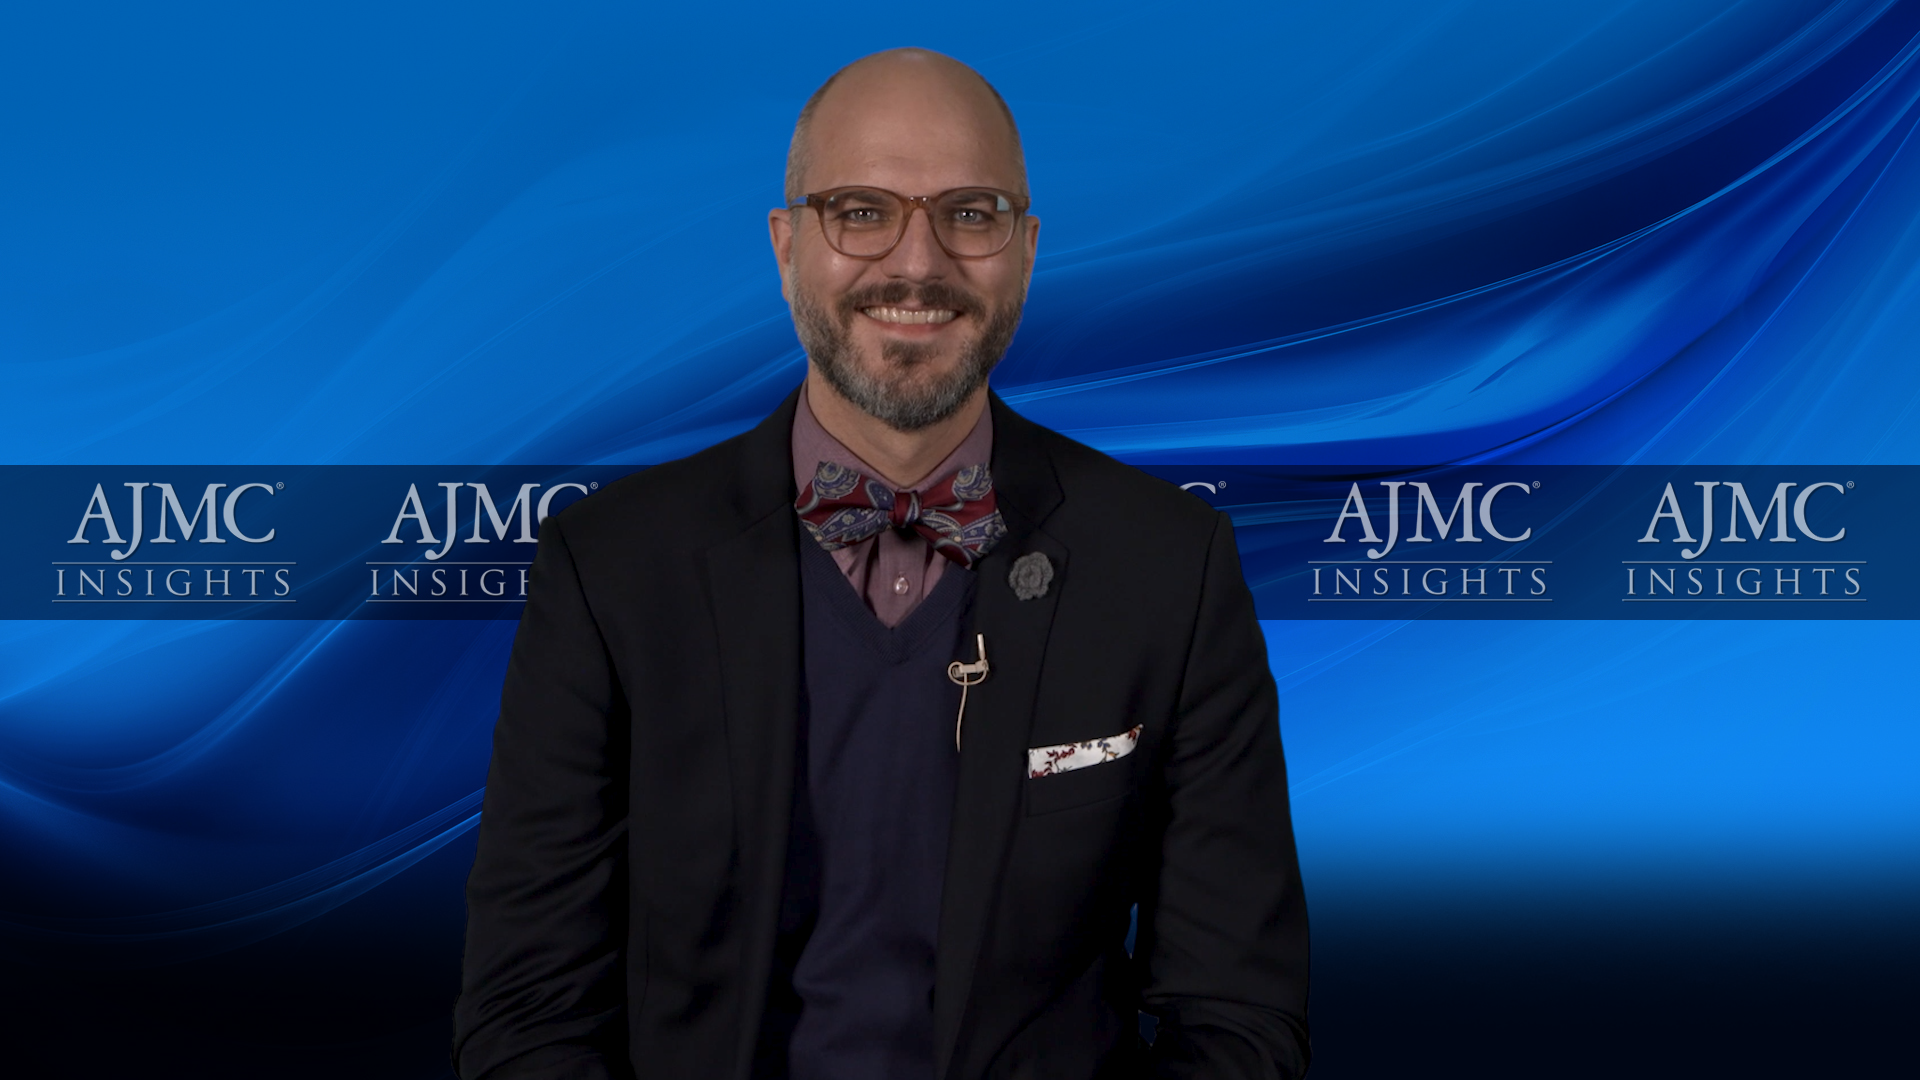 Future of Myelofibrosis: Anticipated Data and Emerging Therapies